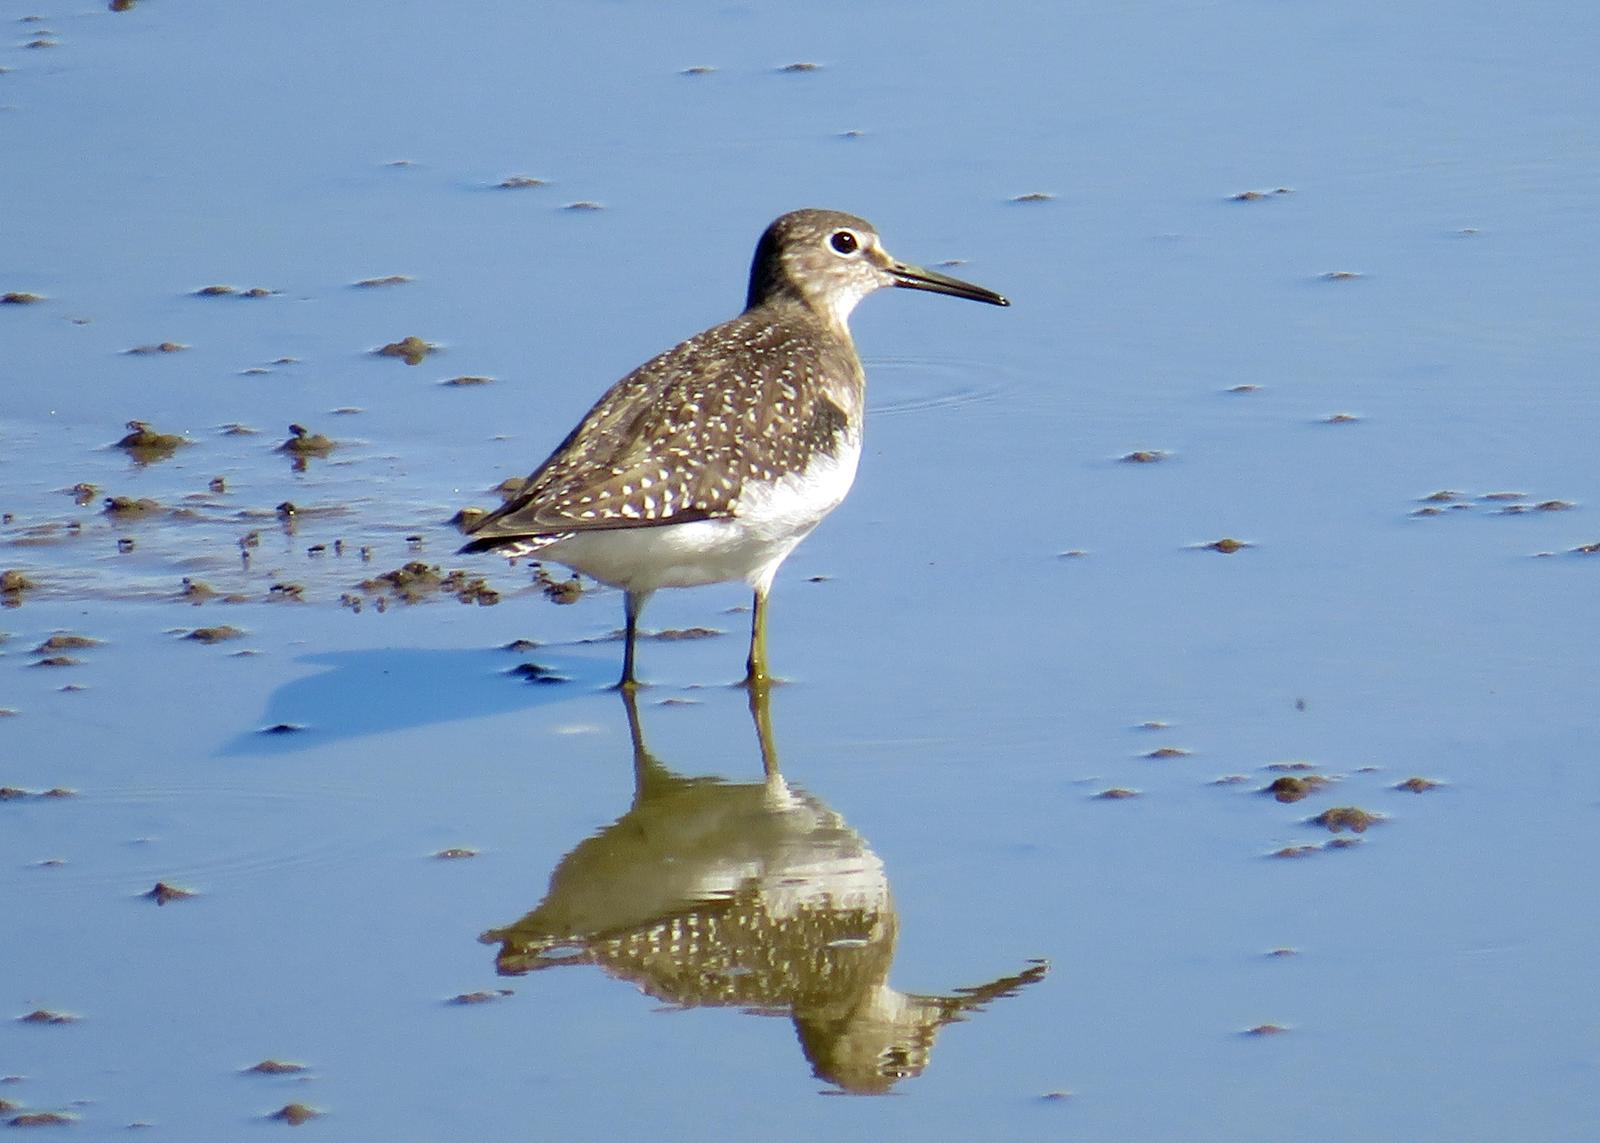 Solitary Sandpiper Photo by Jeff Harding